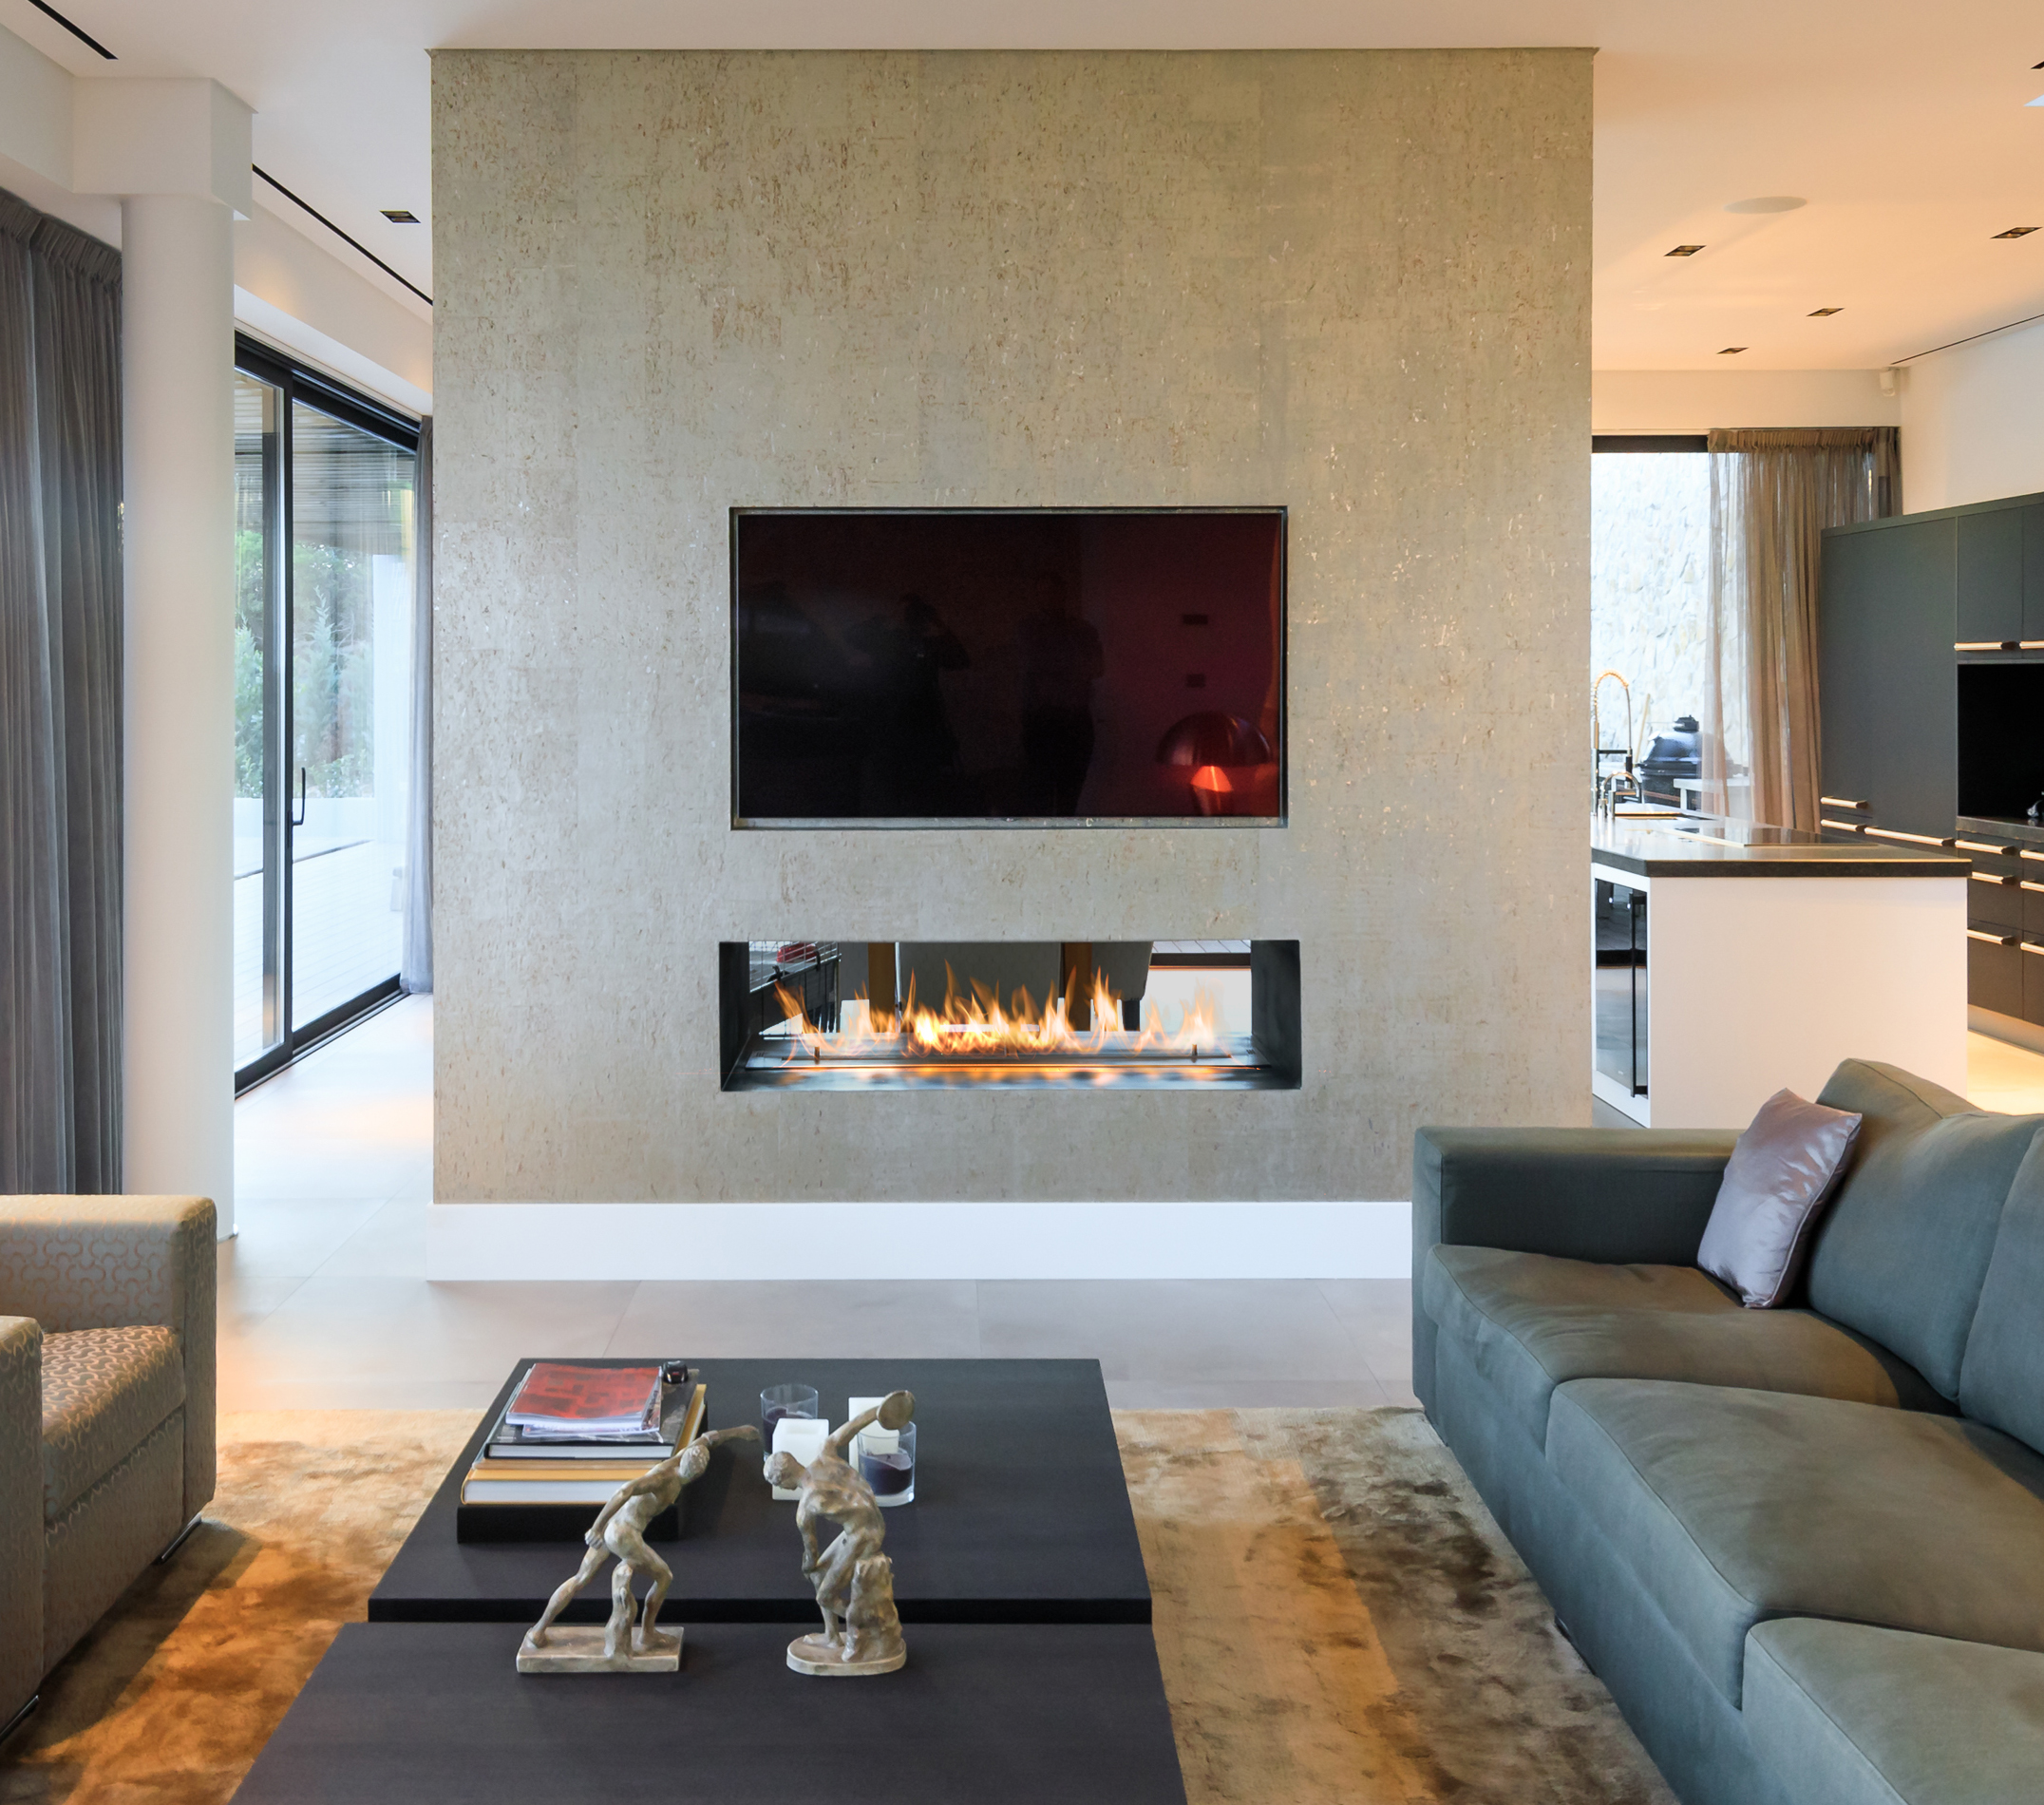 TV placed over a tunnel automatic ethanol burner.